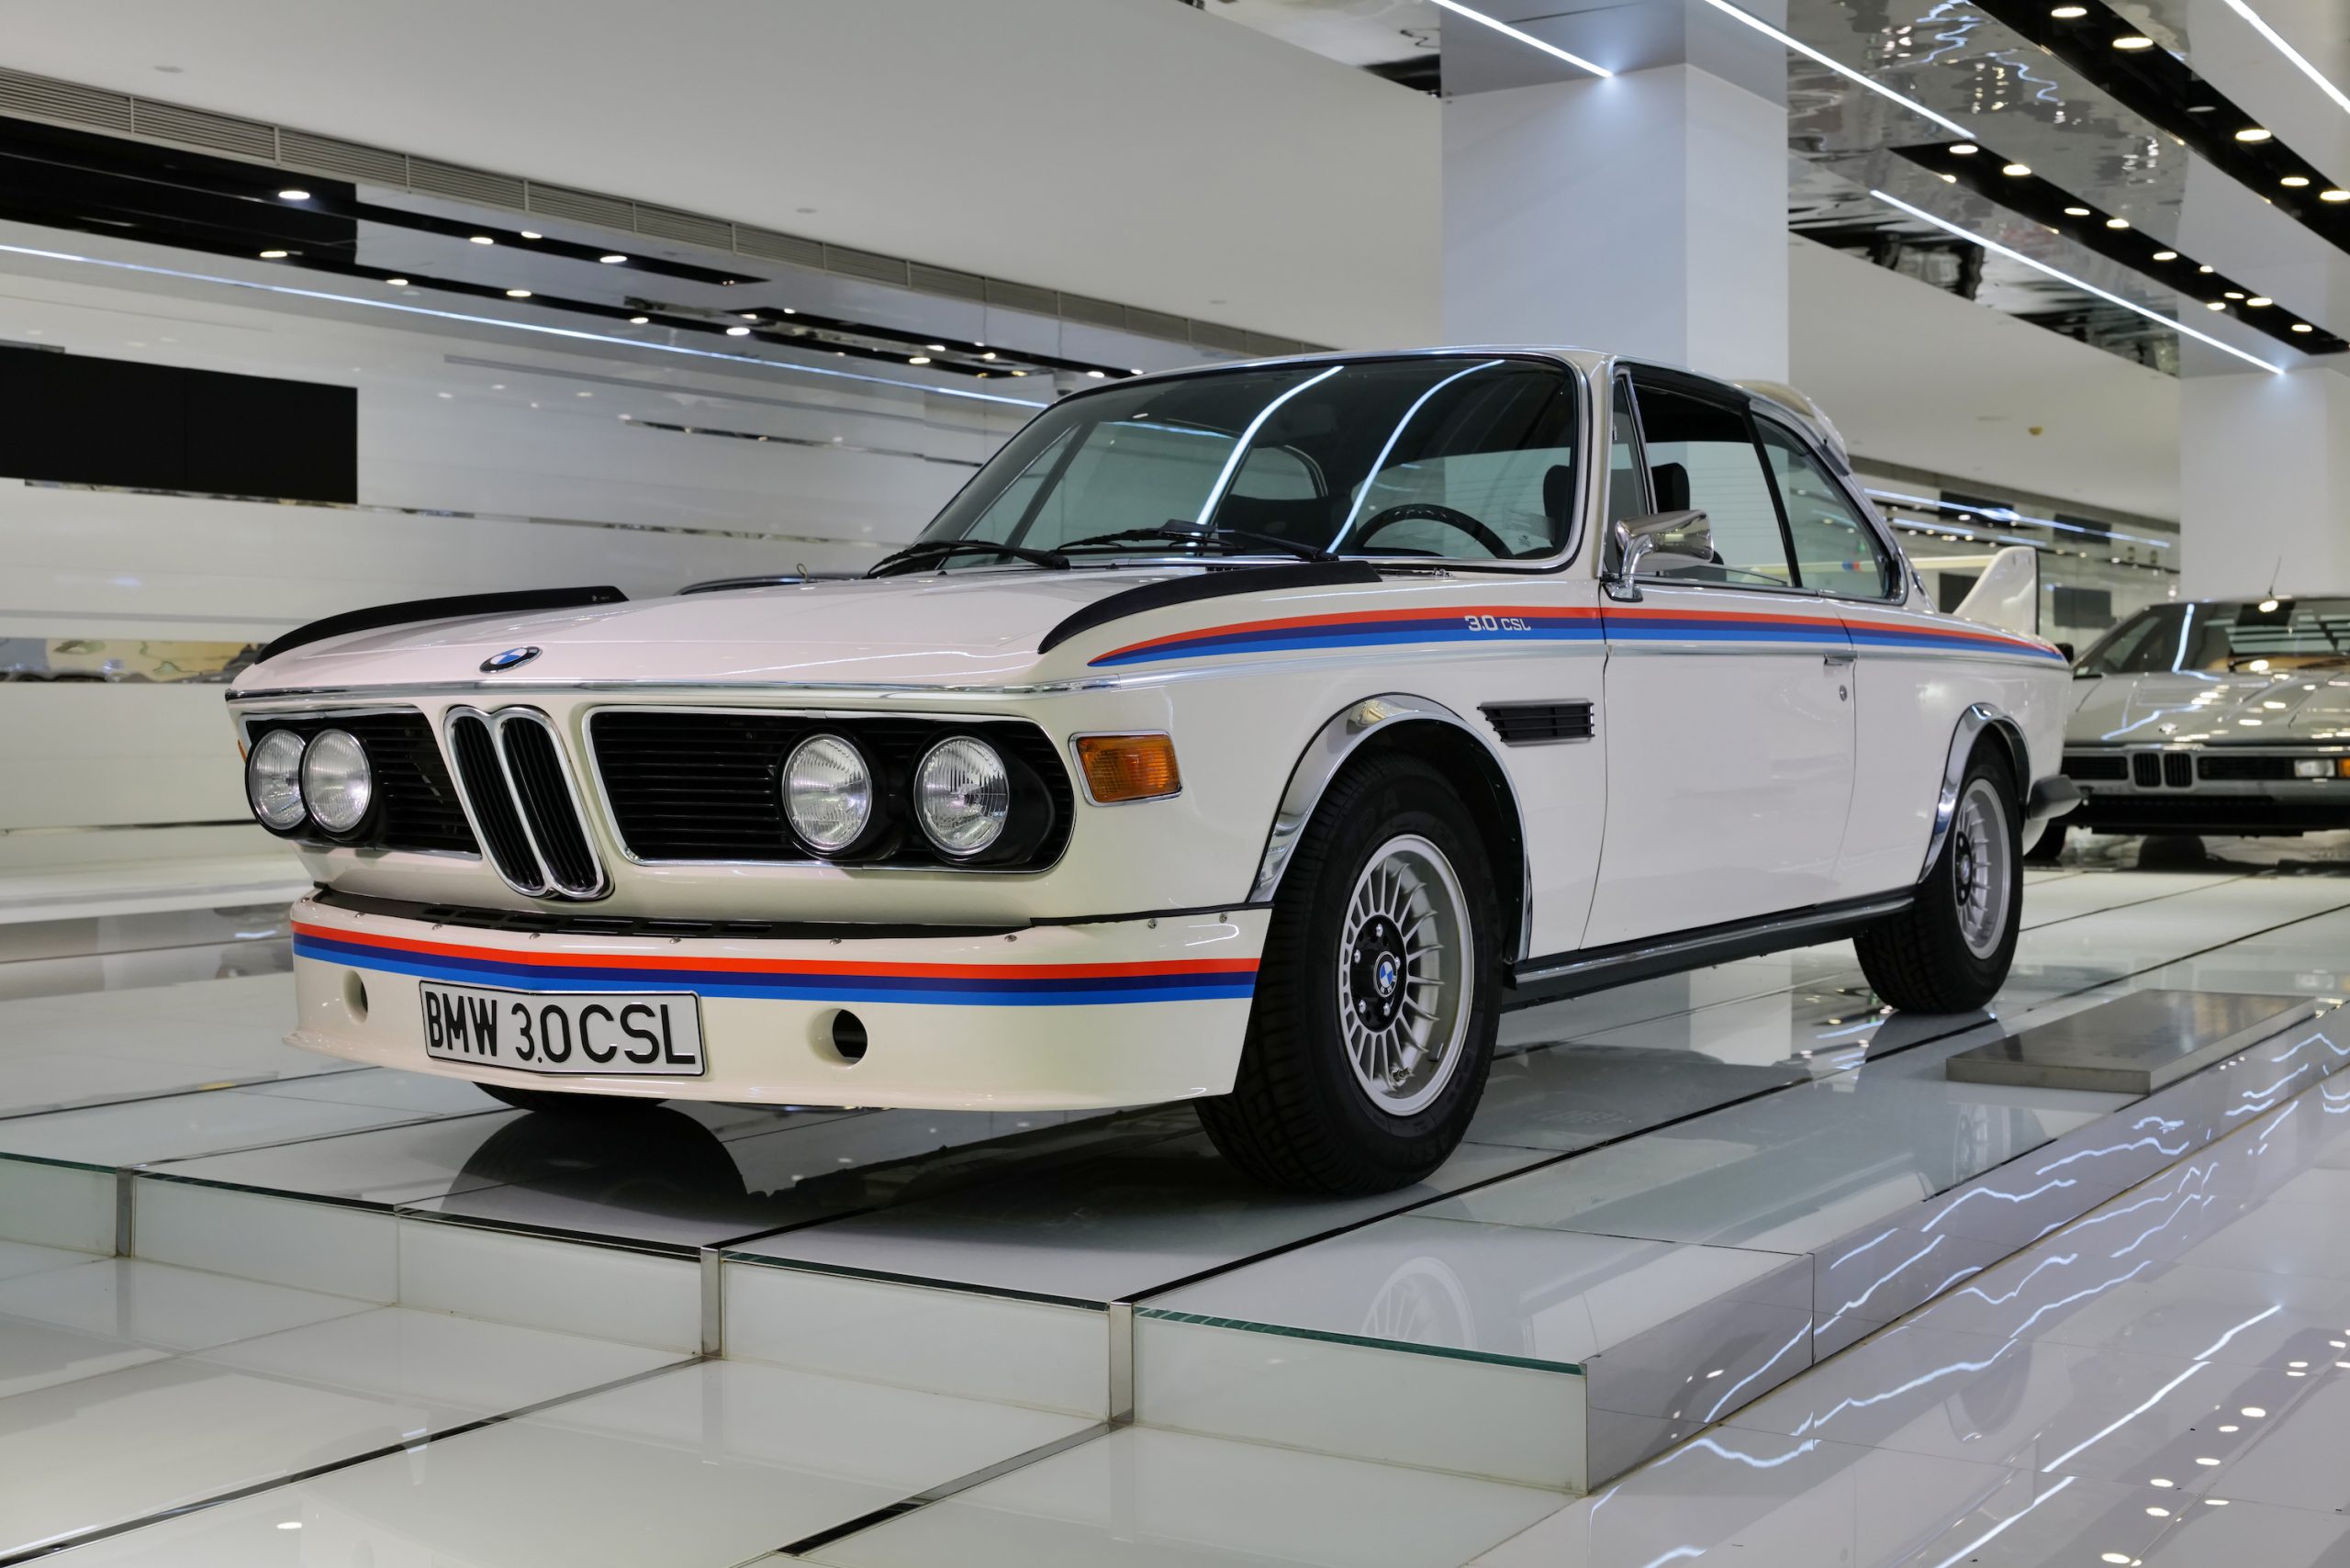 Rare and classic BMWs sell for 'unexpectedly high' prices in Munich